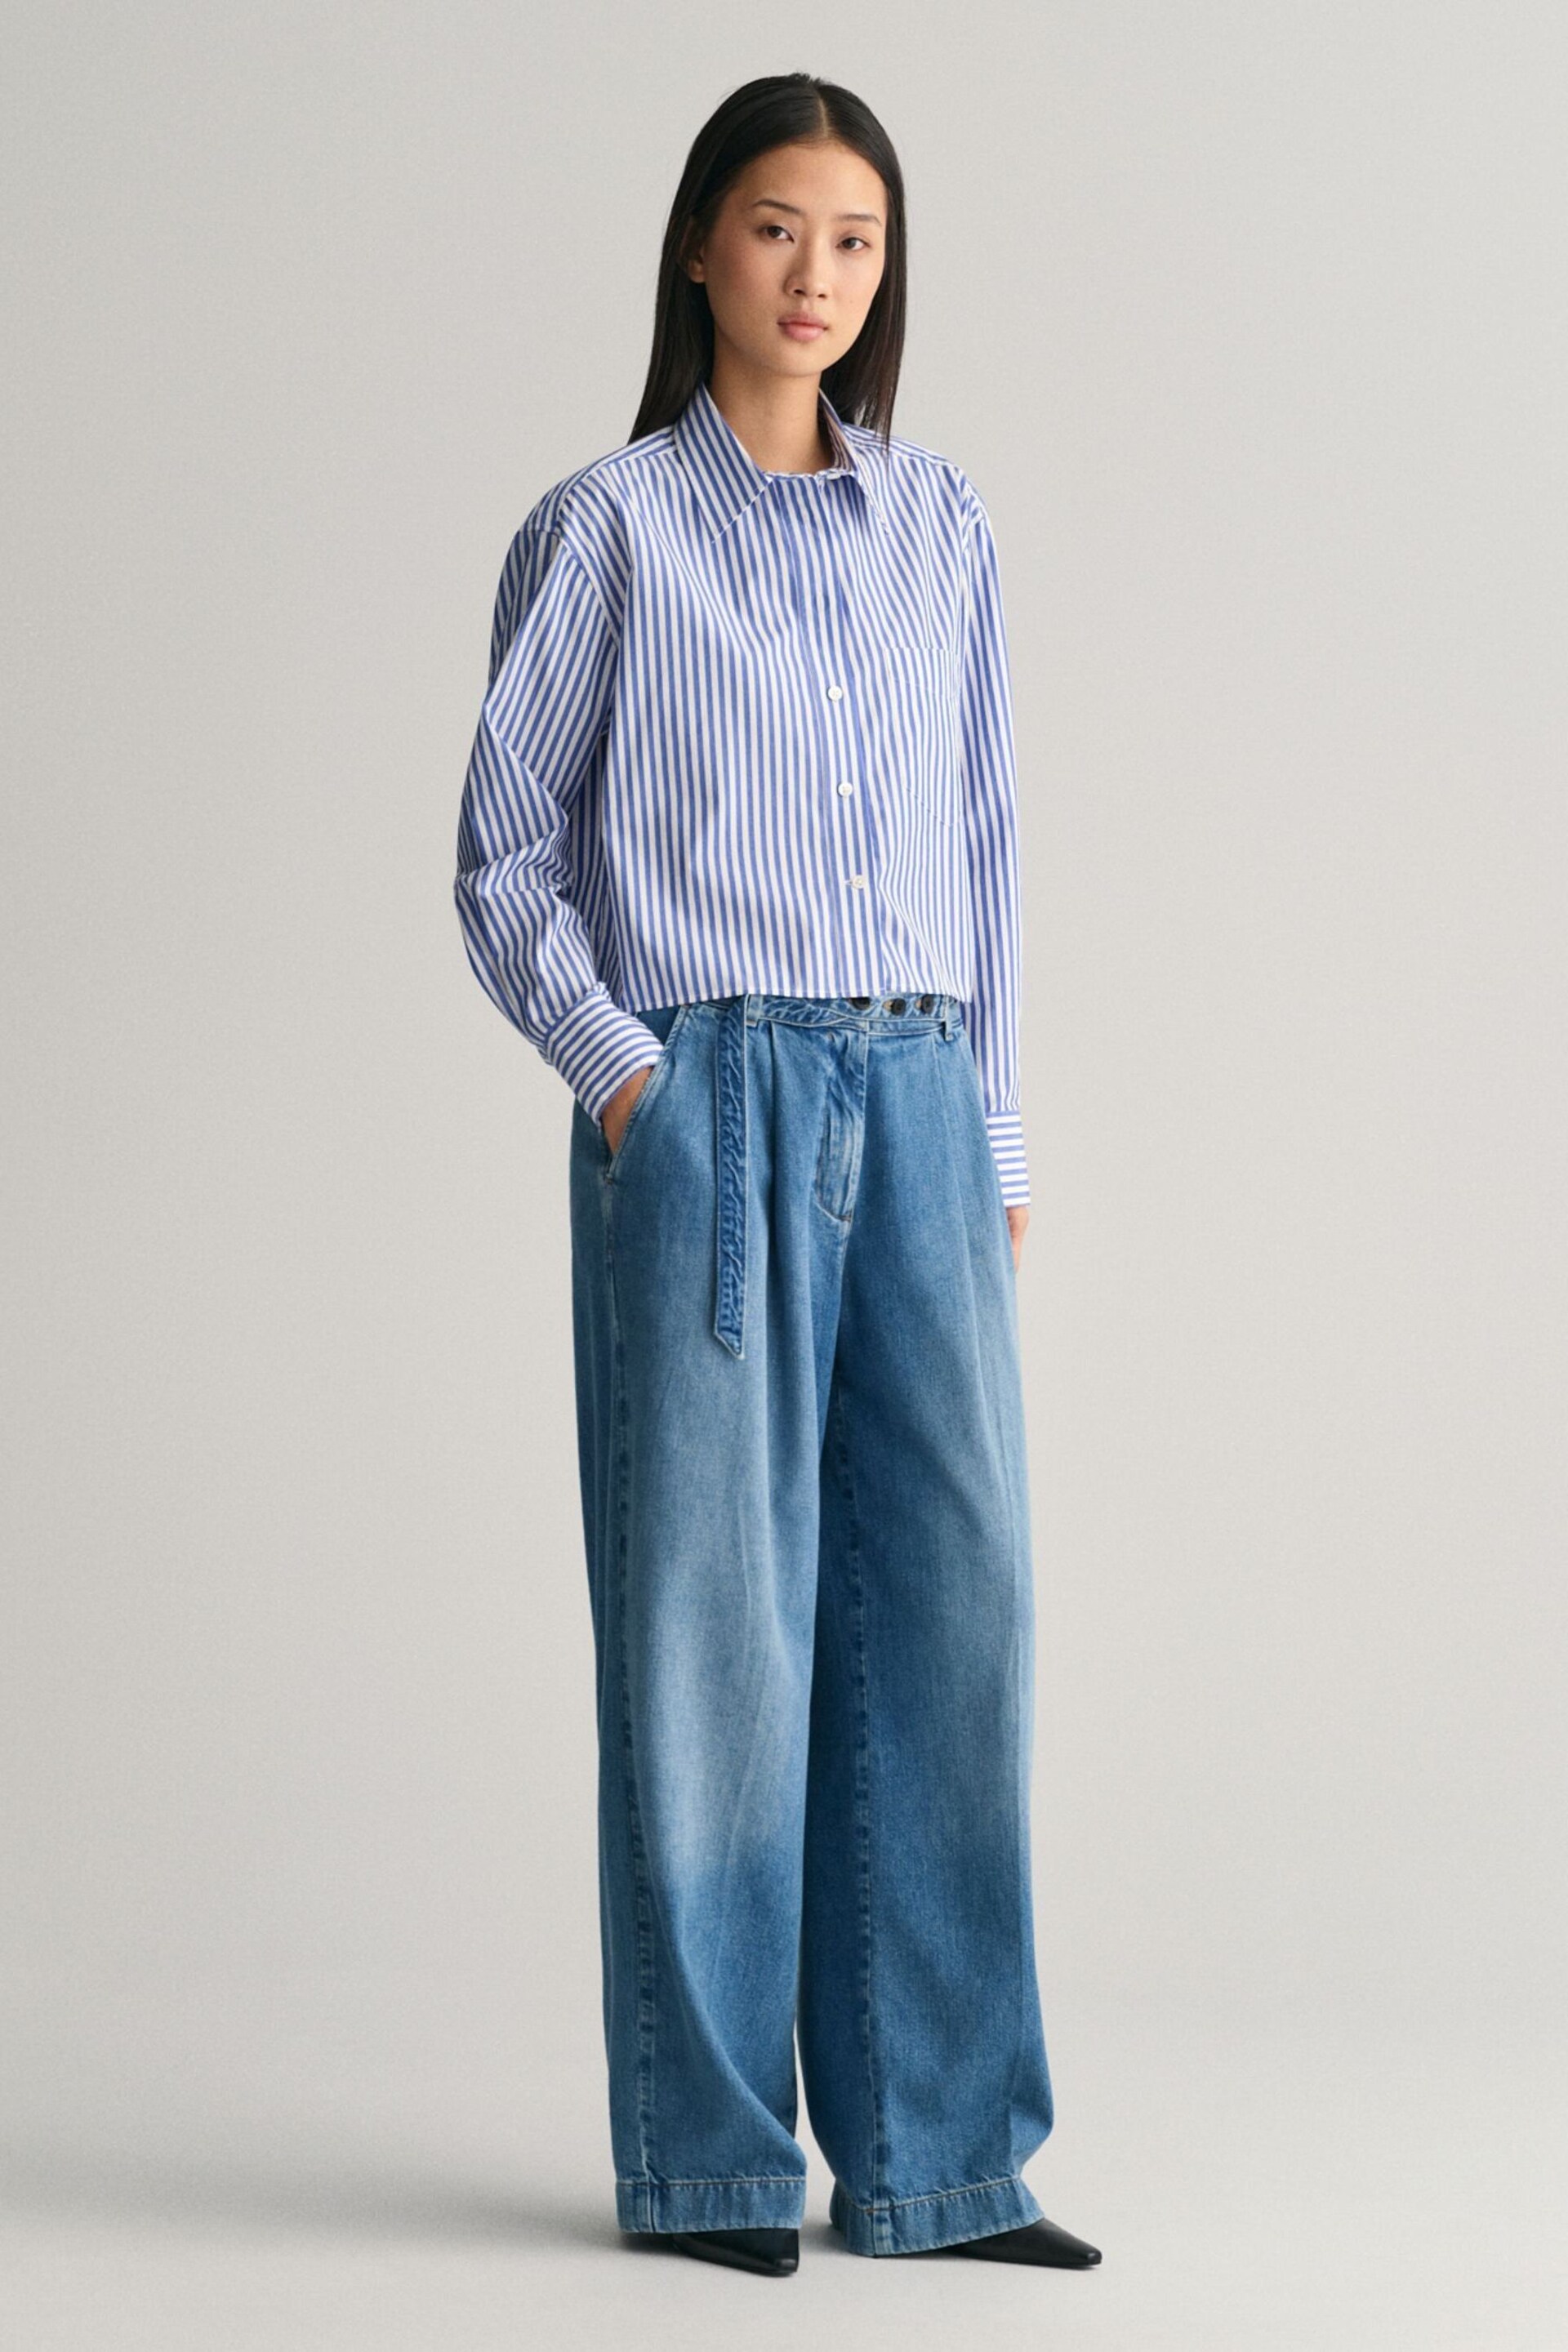 GANT Blue Relaxed Fit Cropped Striped Shirt - Image 3 of 8